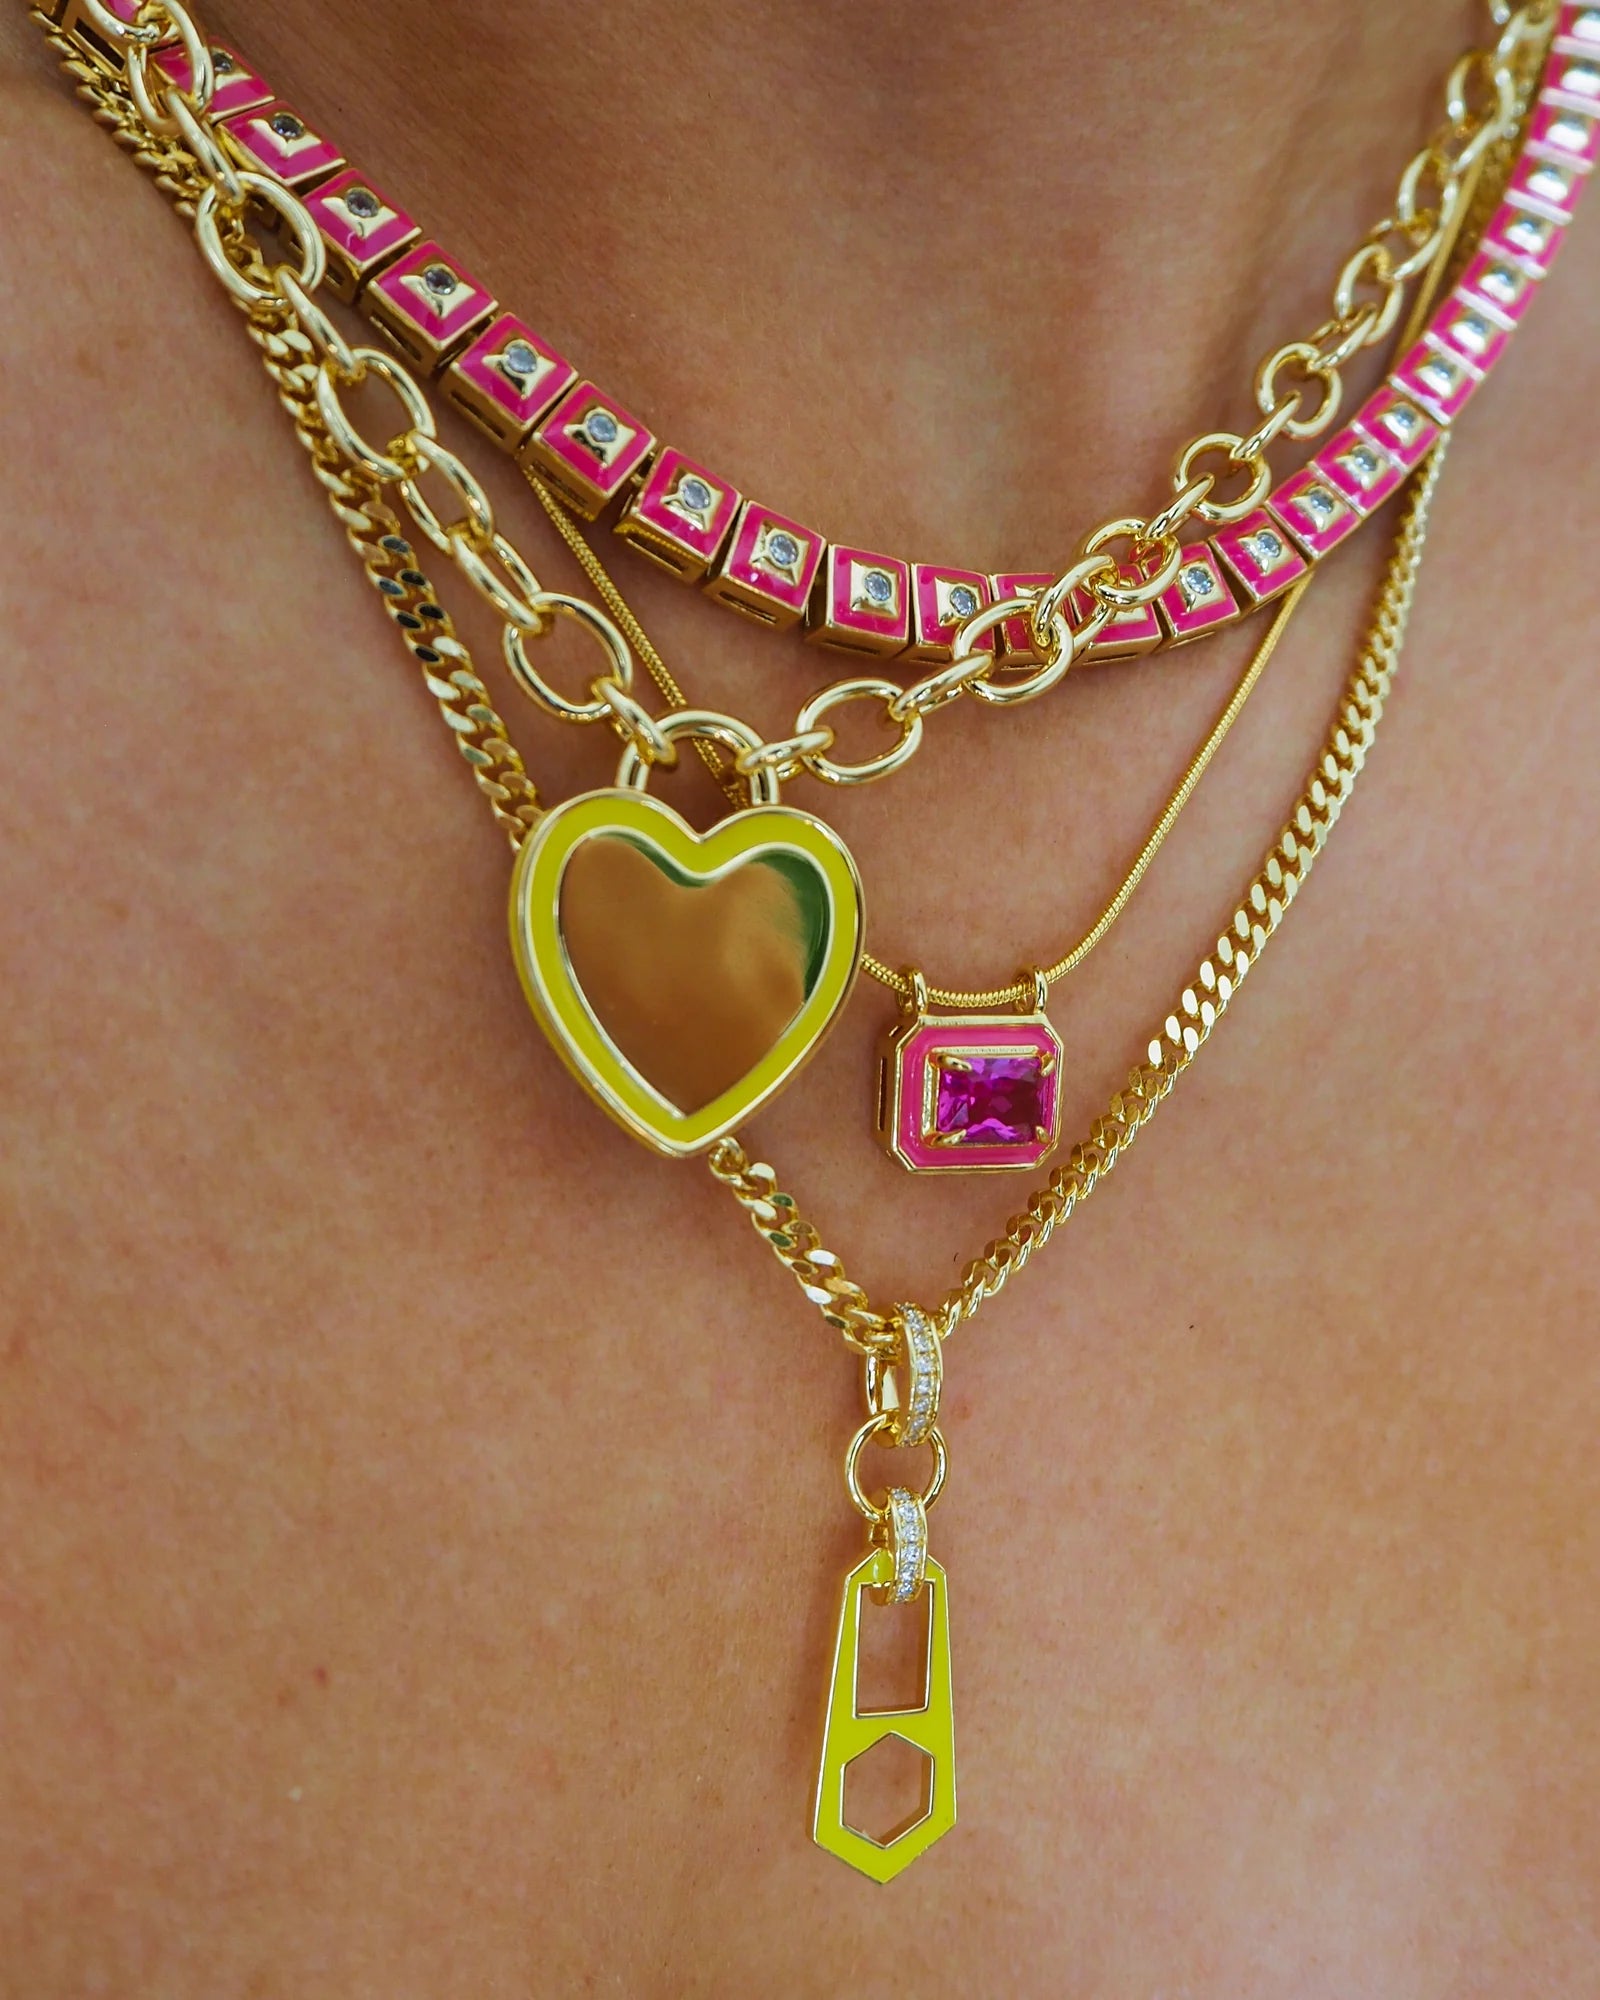 Pyramid Stud Tennis Necklace - Hot pink - Gold